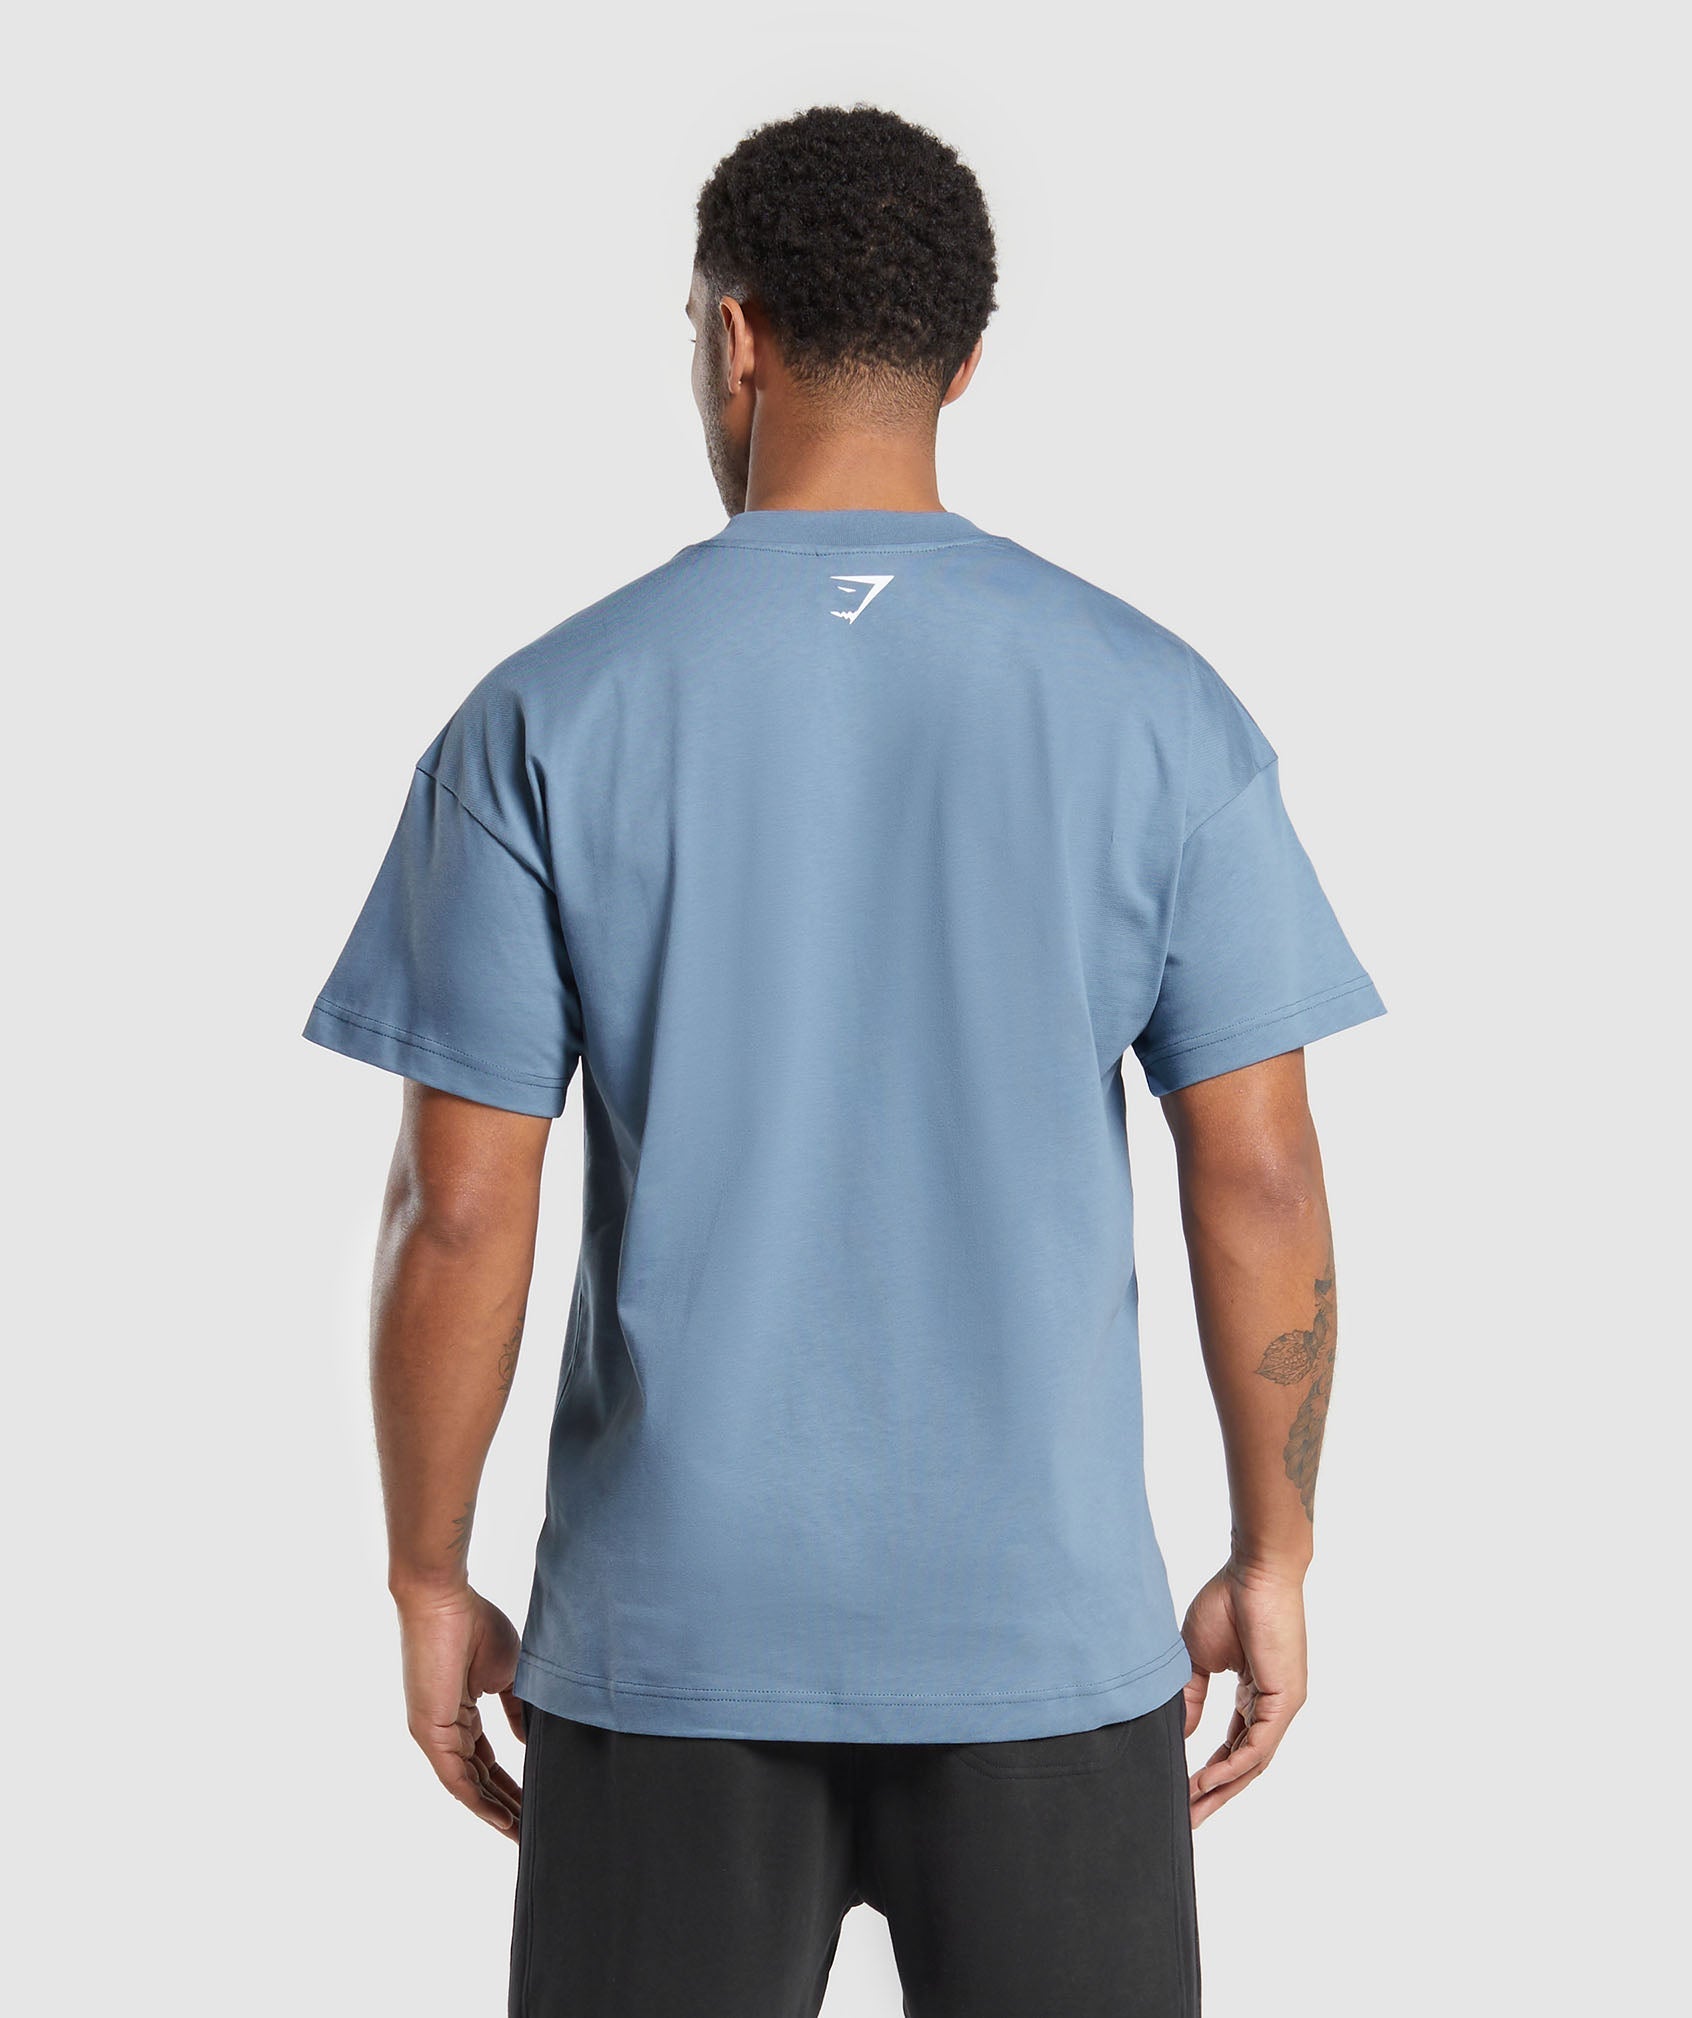 Built in the UK T-Shirt in Faded Blue - view 2